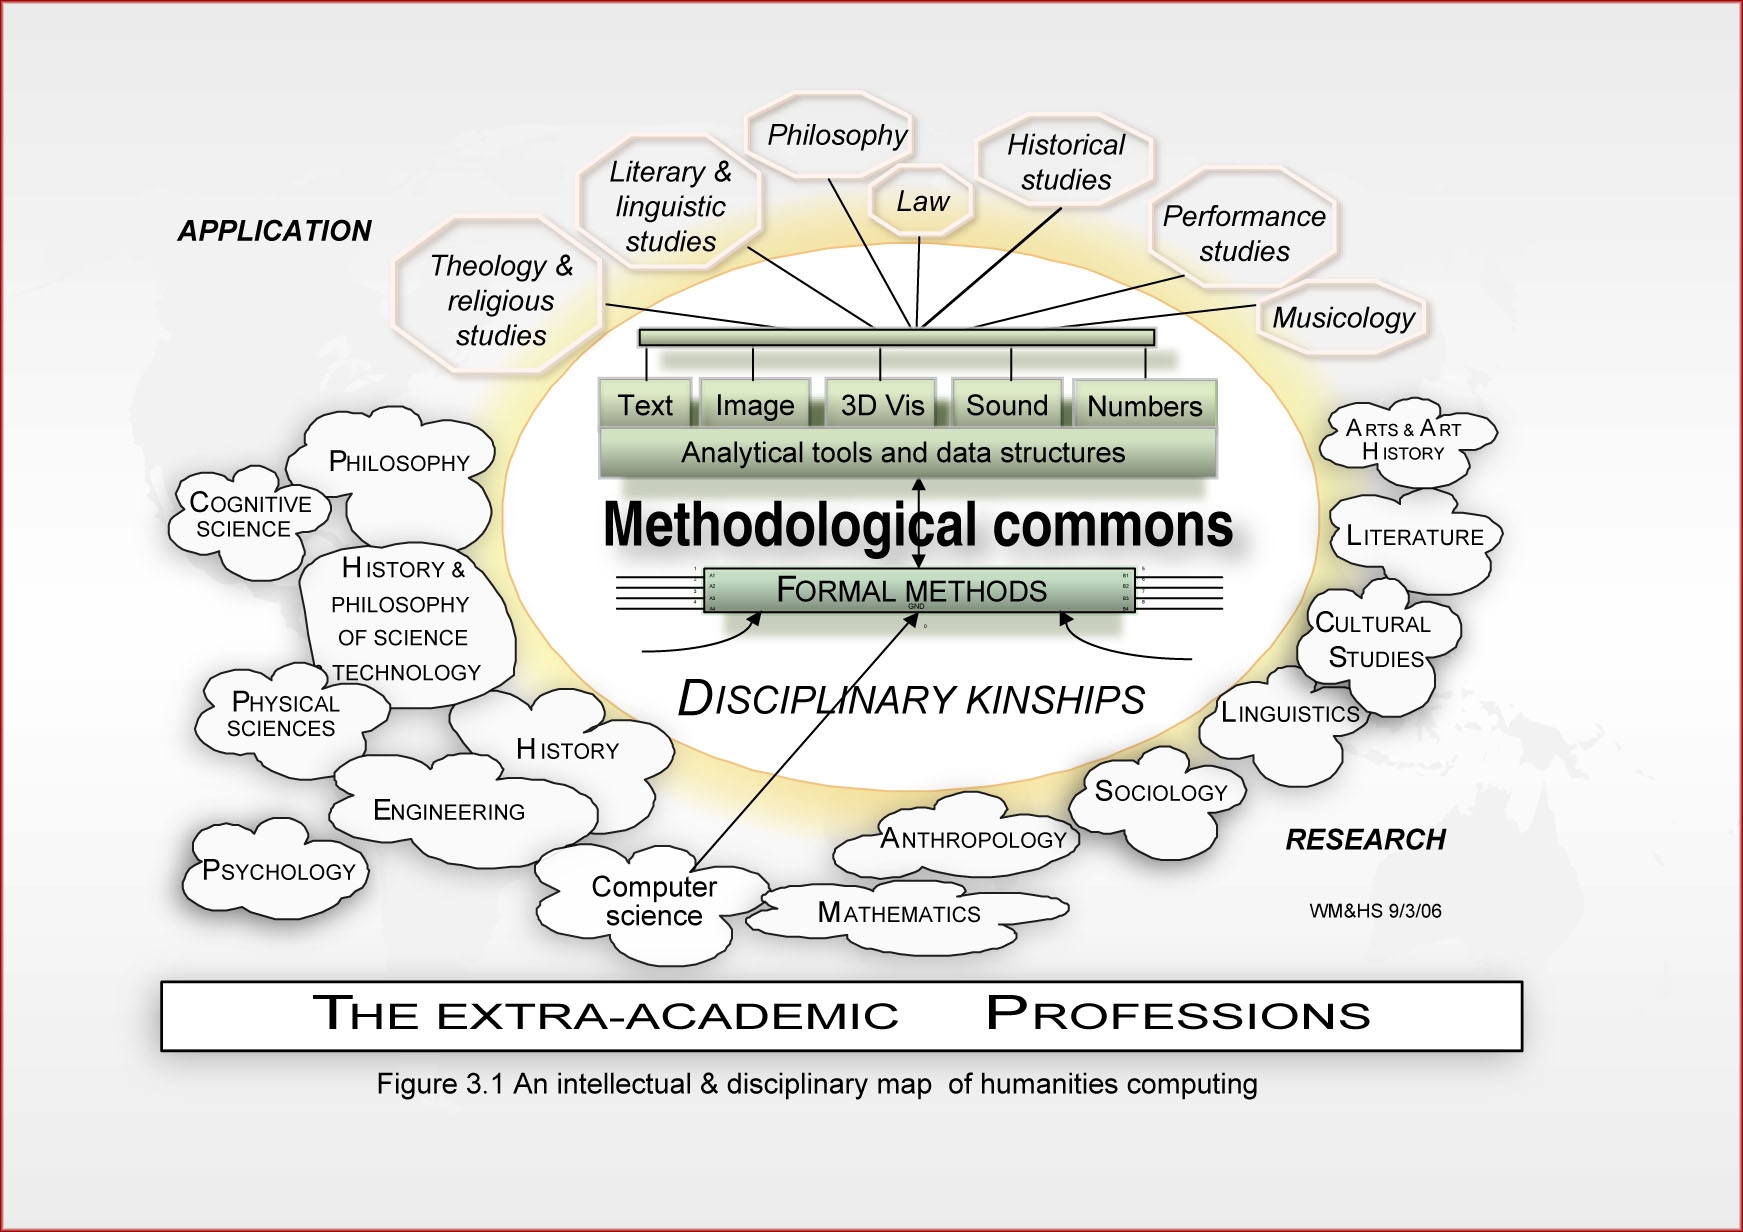 An intellectual and disciplinary map of humanities
    computing (Willard McCarty and Harold Short, via the HUMANIST
    discussion group. 2006. Alliance of Digital Humanities
    Organizations).